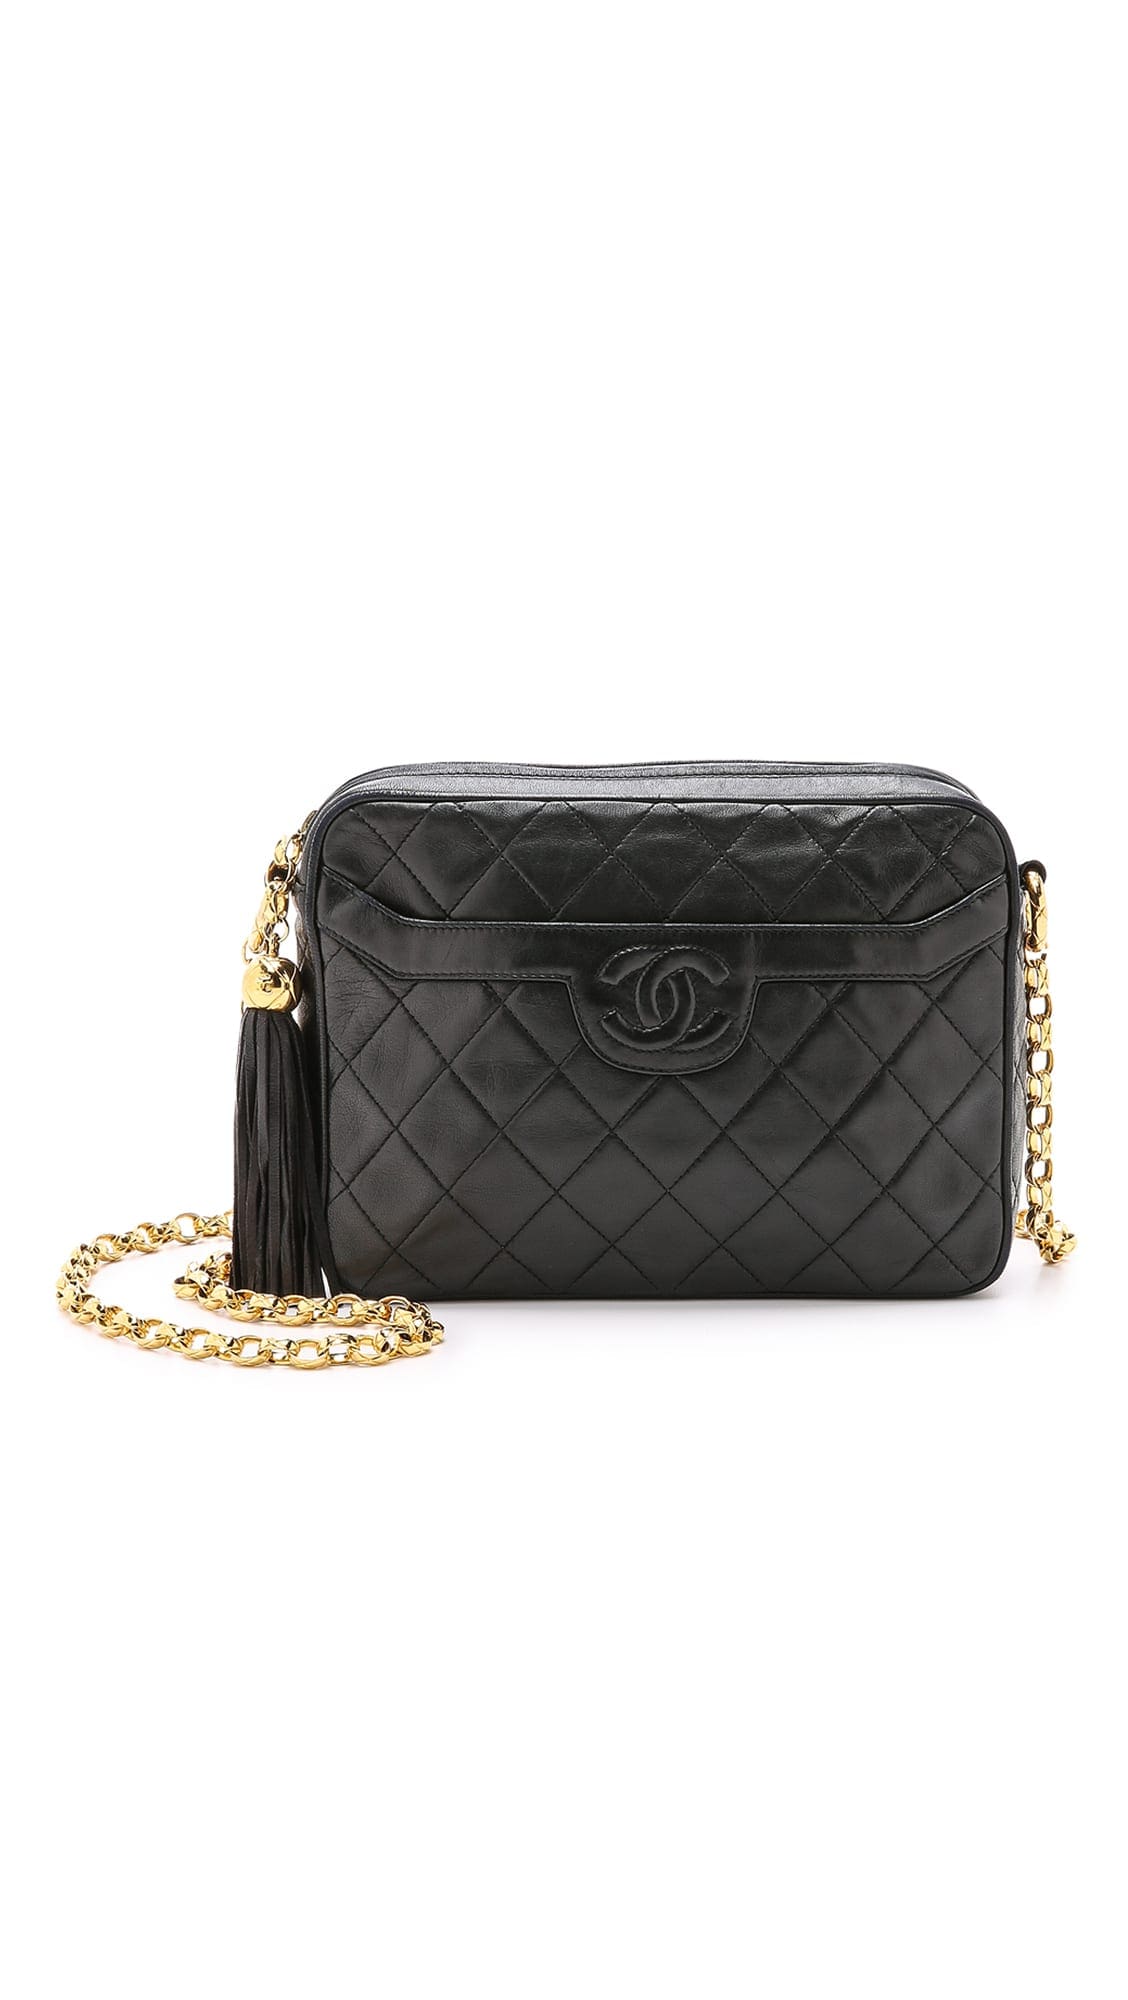 shopbop What Goes Around Comes Around Chanel Camera Bag